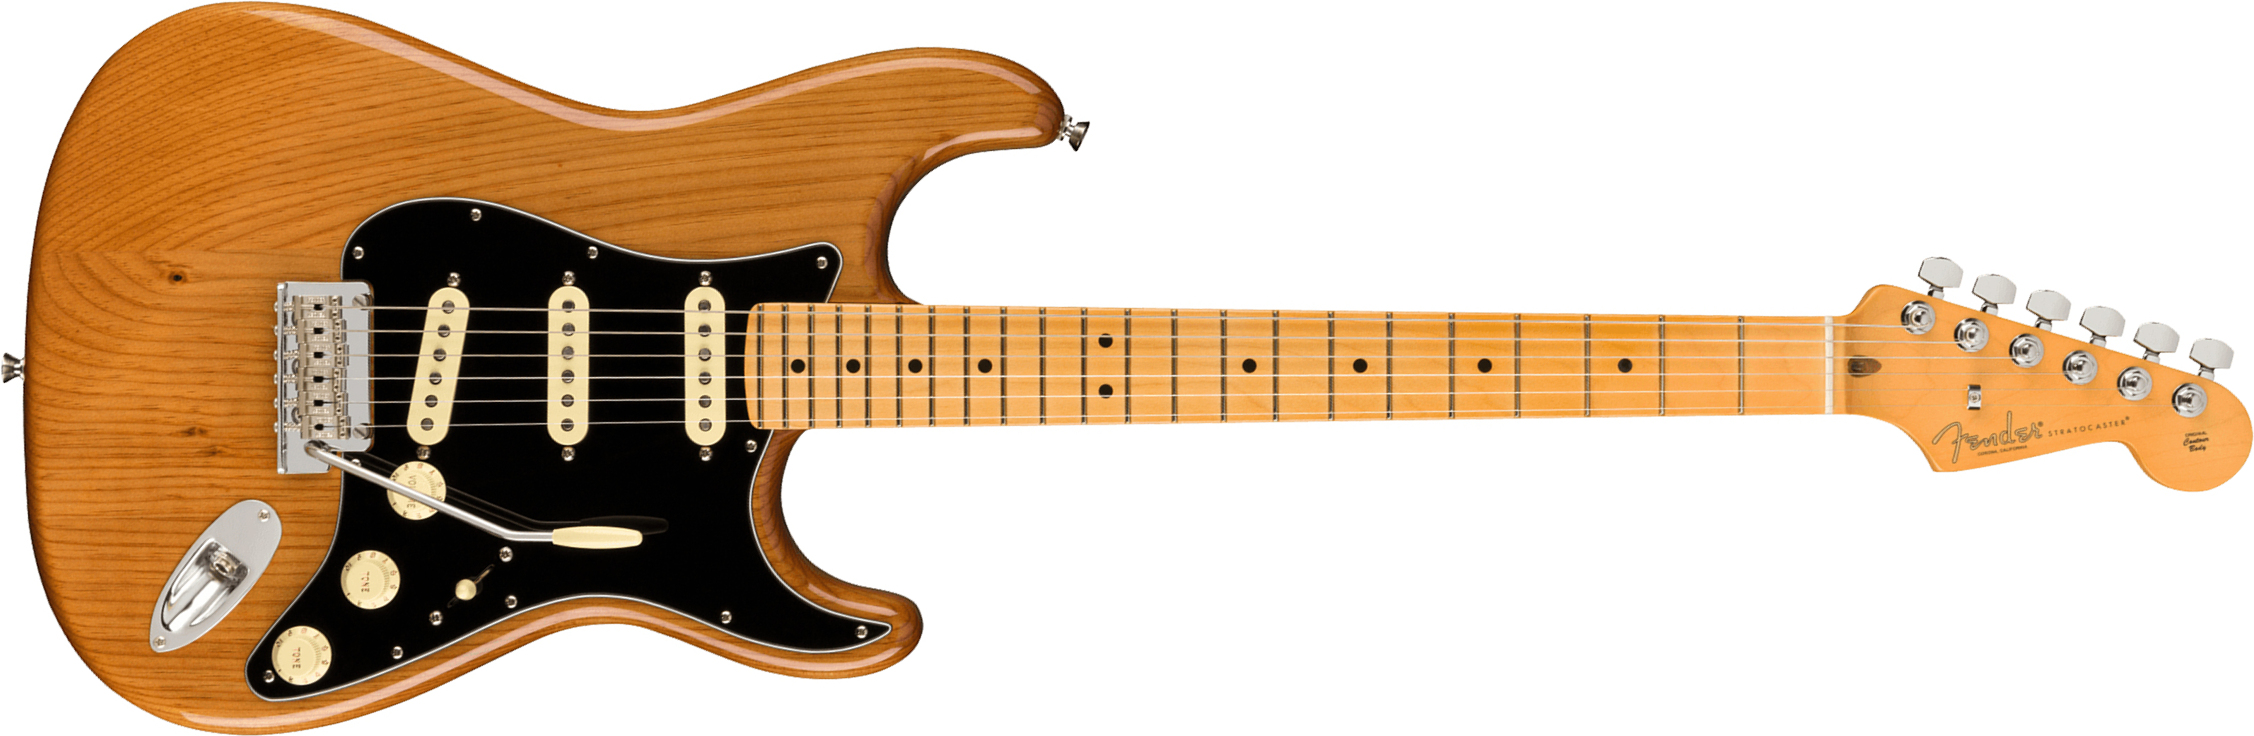 Fender Strat American Professional Ii Usa Mn - Roasted Pine - Str shape electric guitar - Main picture